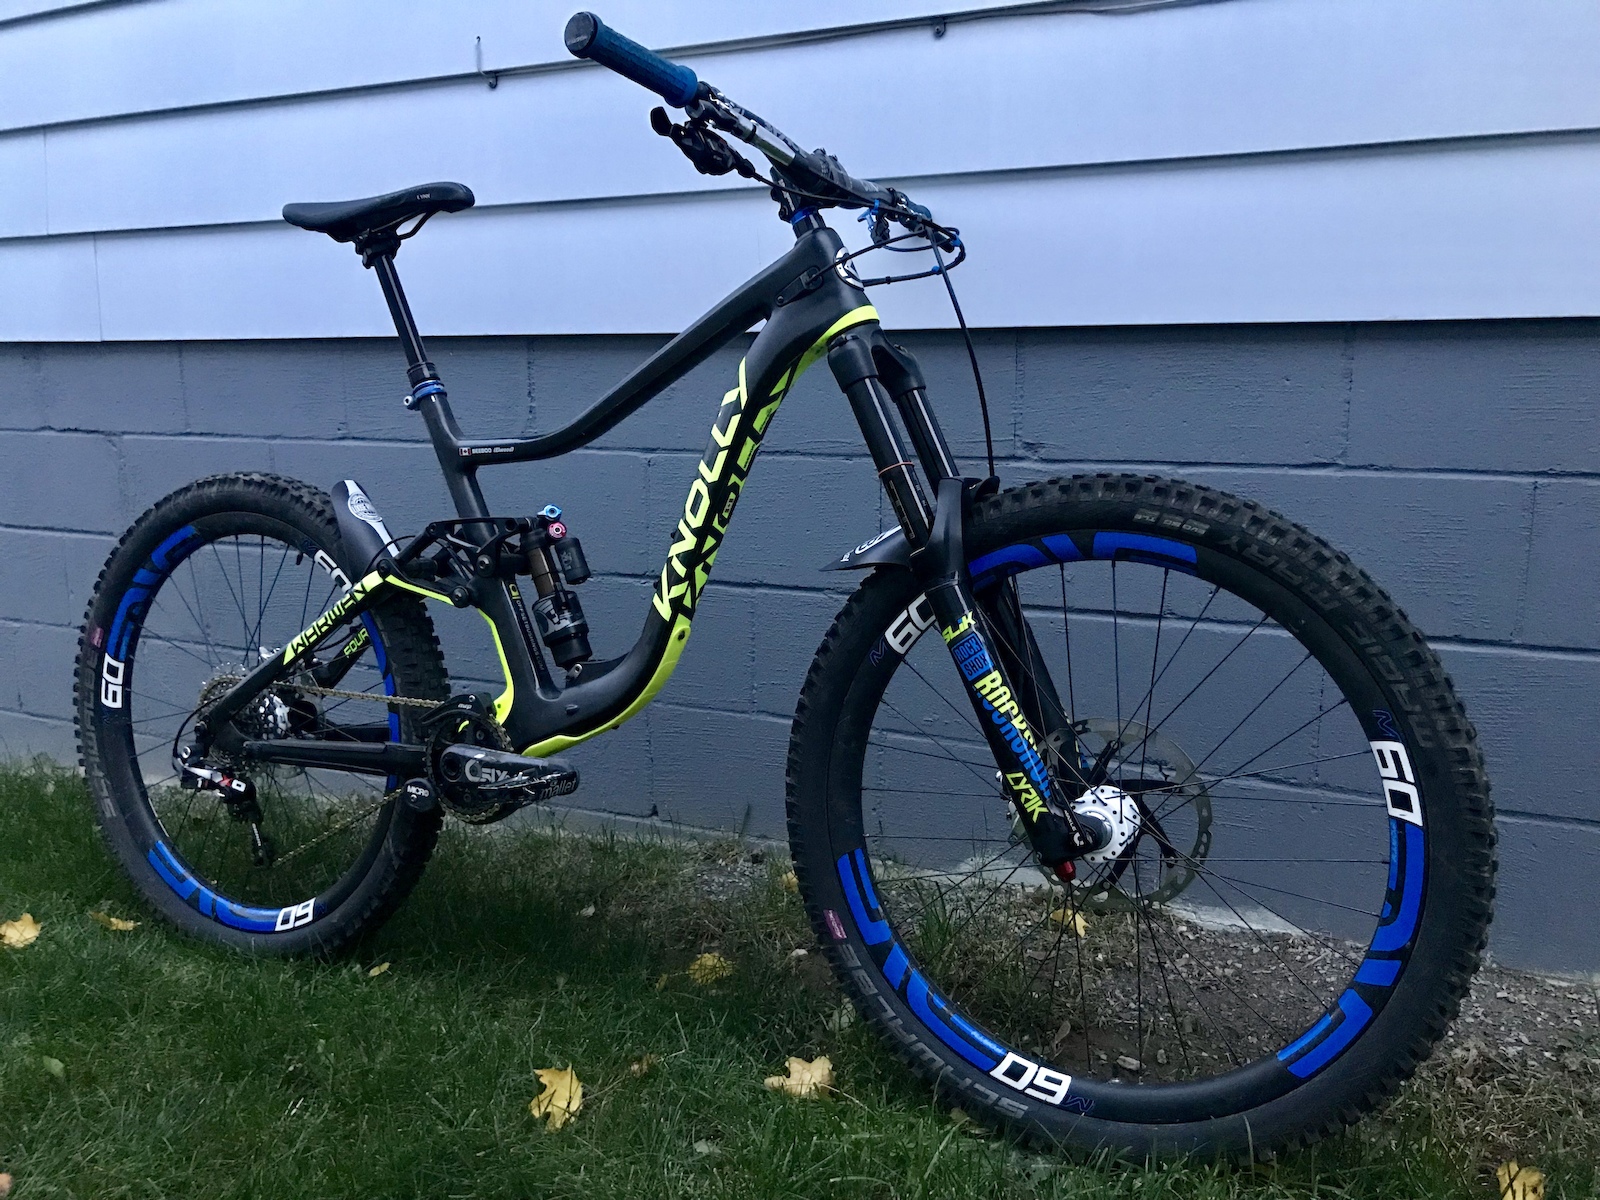 Knolly Warden Carbon completely wrapped in 3M helicopter tape &amp; Gorilla tape, Rockshox Lyrik 150-180mm Dual Position, Fox Float X2, RaceFace SixC everything, Sram X01 11-speed drivetrain, MRP chain guide, KMC gold chain, LB Rims with Enve decals on Onyx Racing Hubs, Sram Guide RSC brakes with Shimano Ice Tech 200/180mm rotors. Pedals &amp; mud flaps not included.